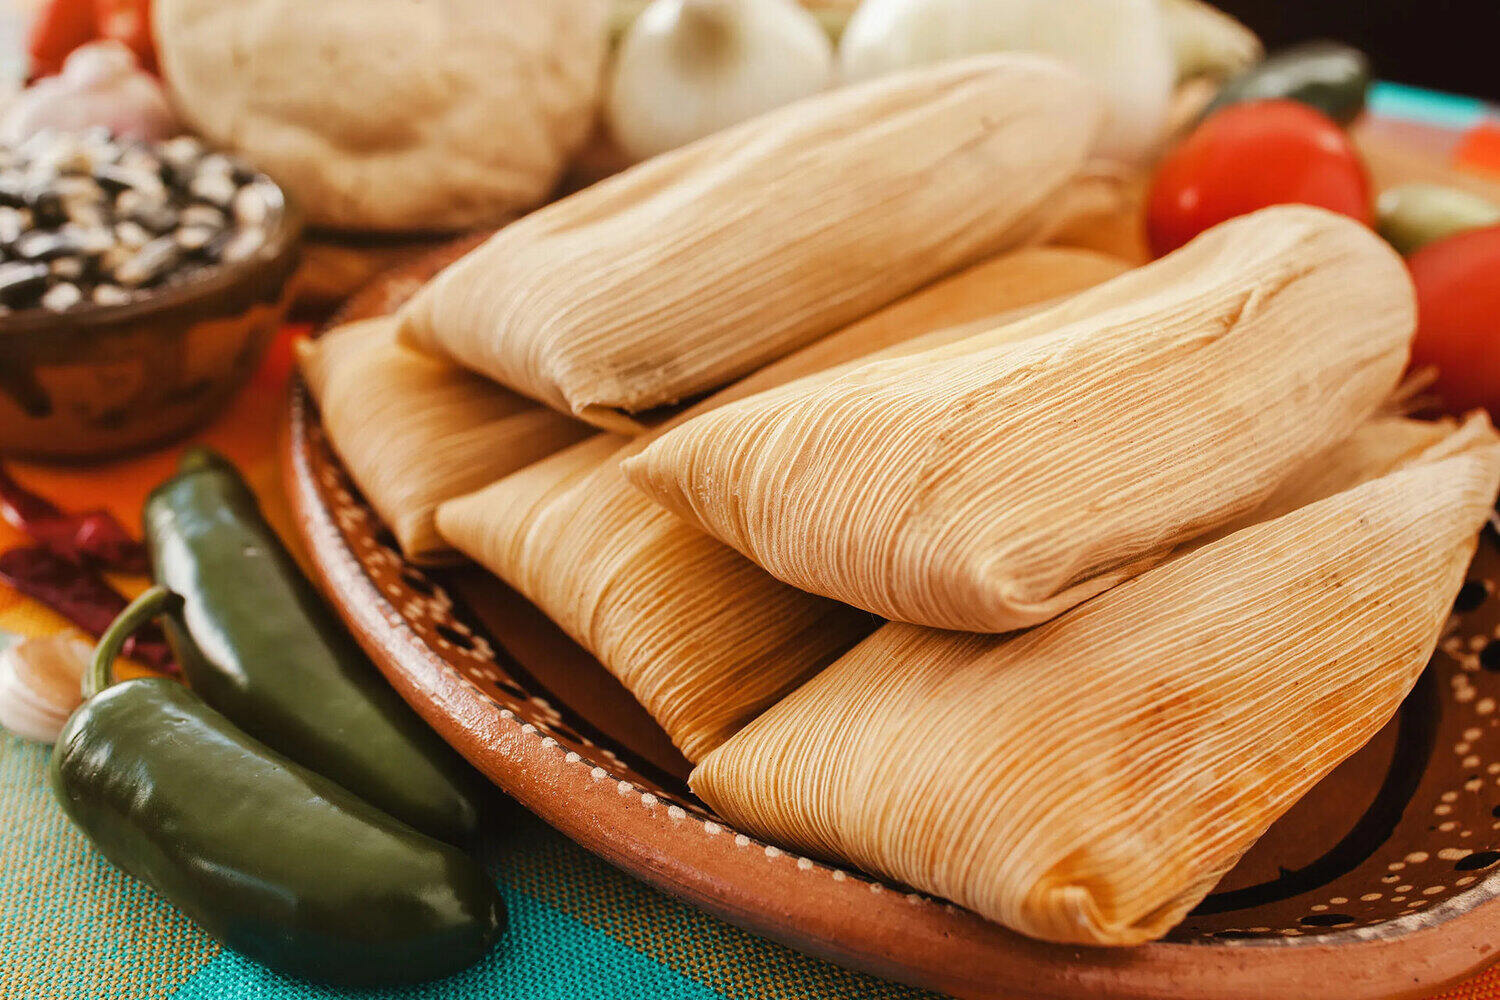 How To Store Cooked Tamales